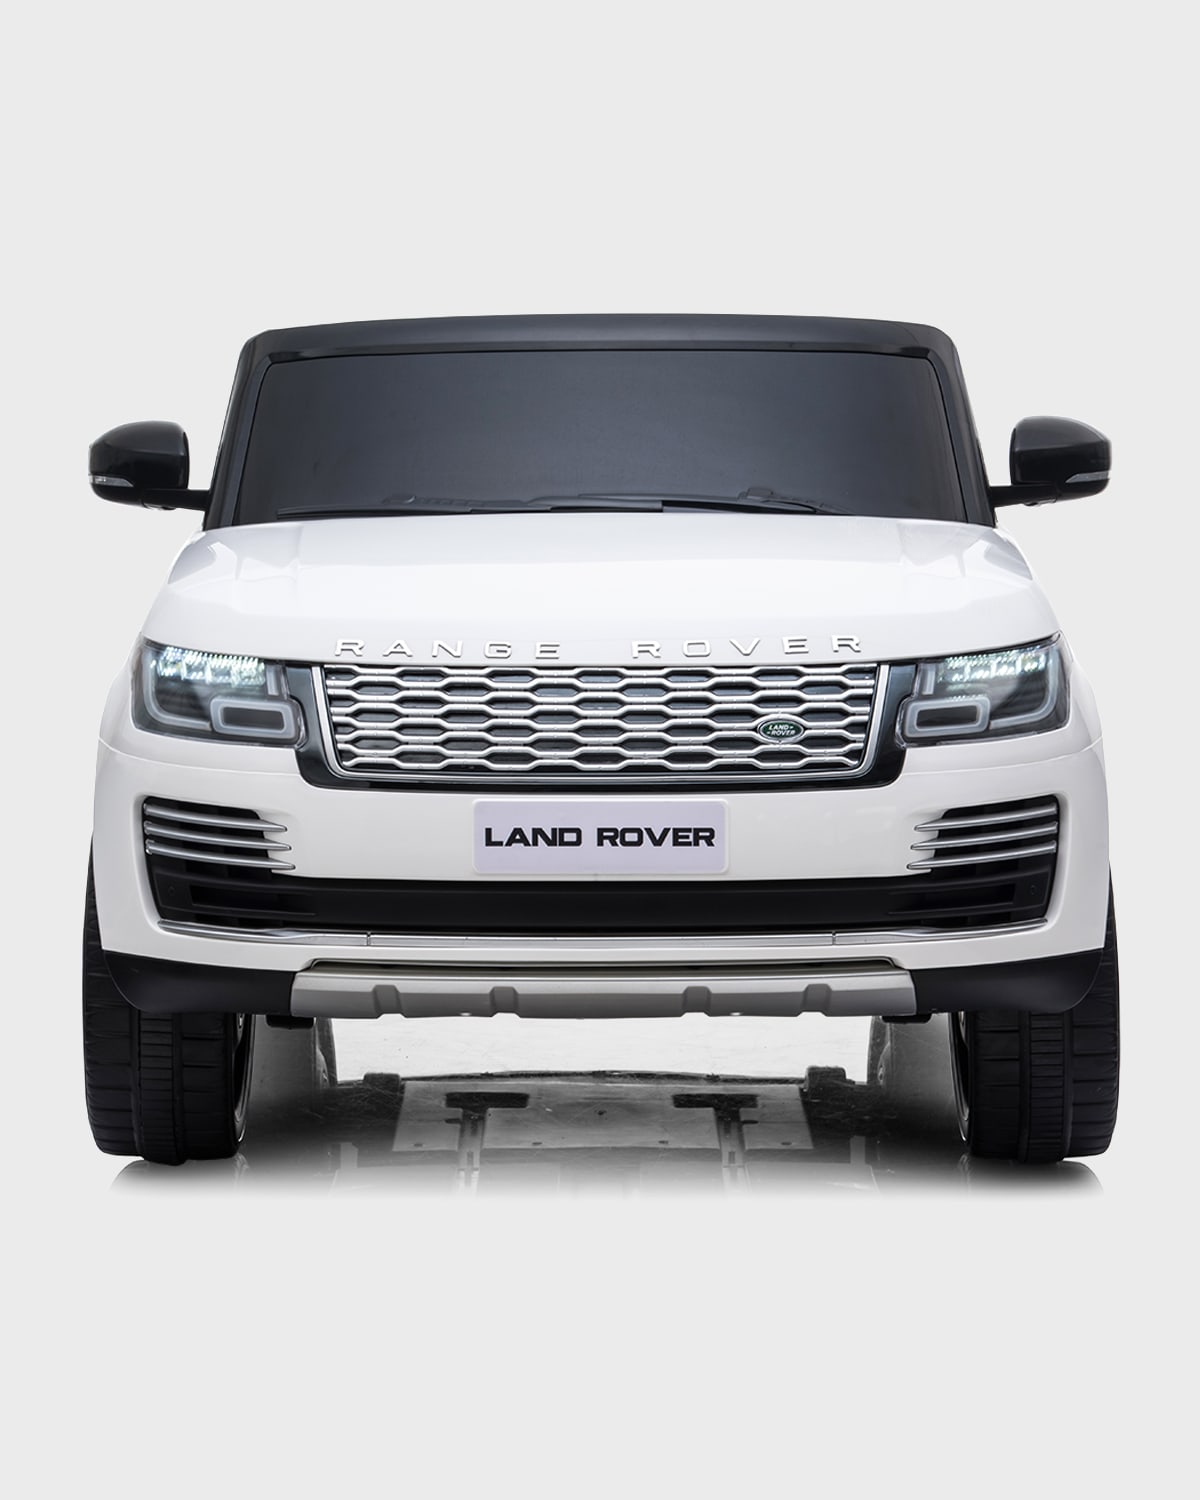 Kid's Range Rover 2 Seater Ride On Car